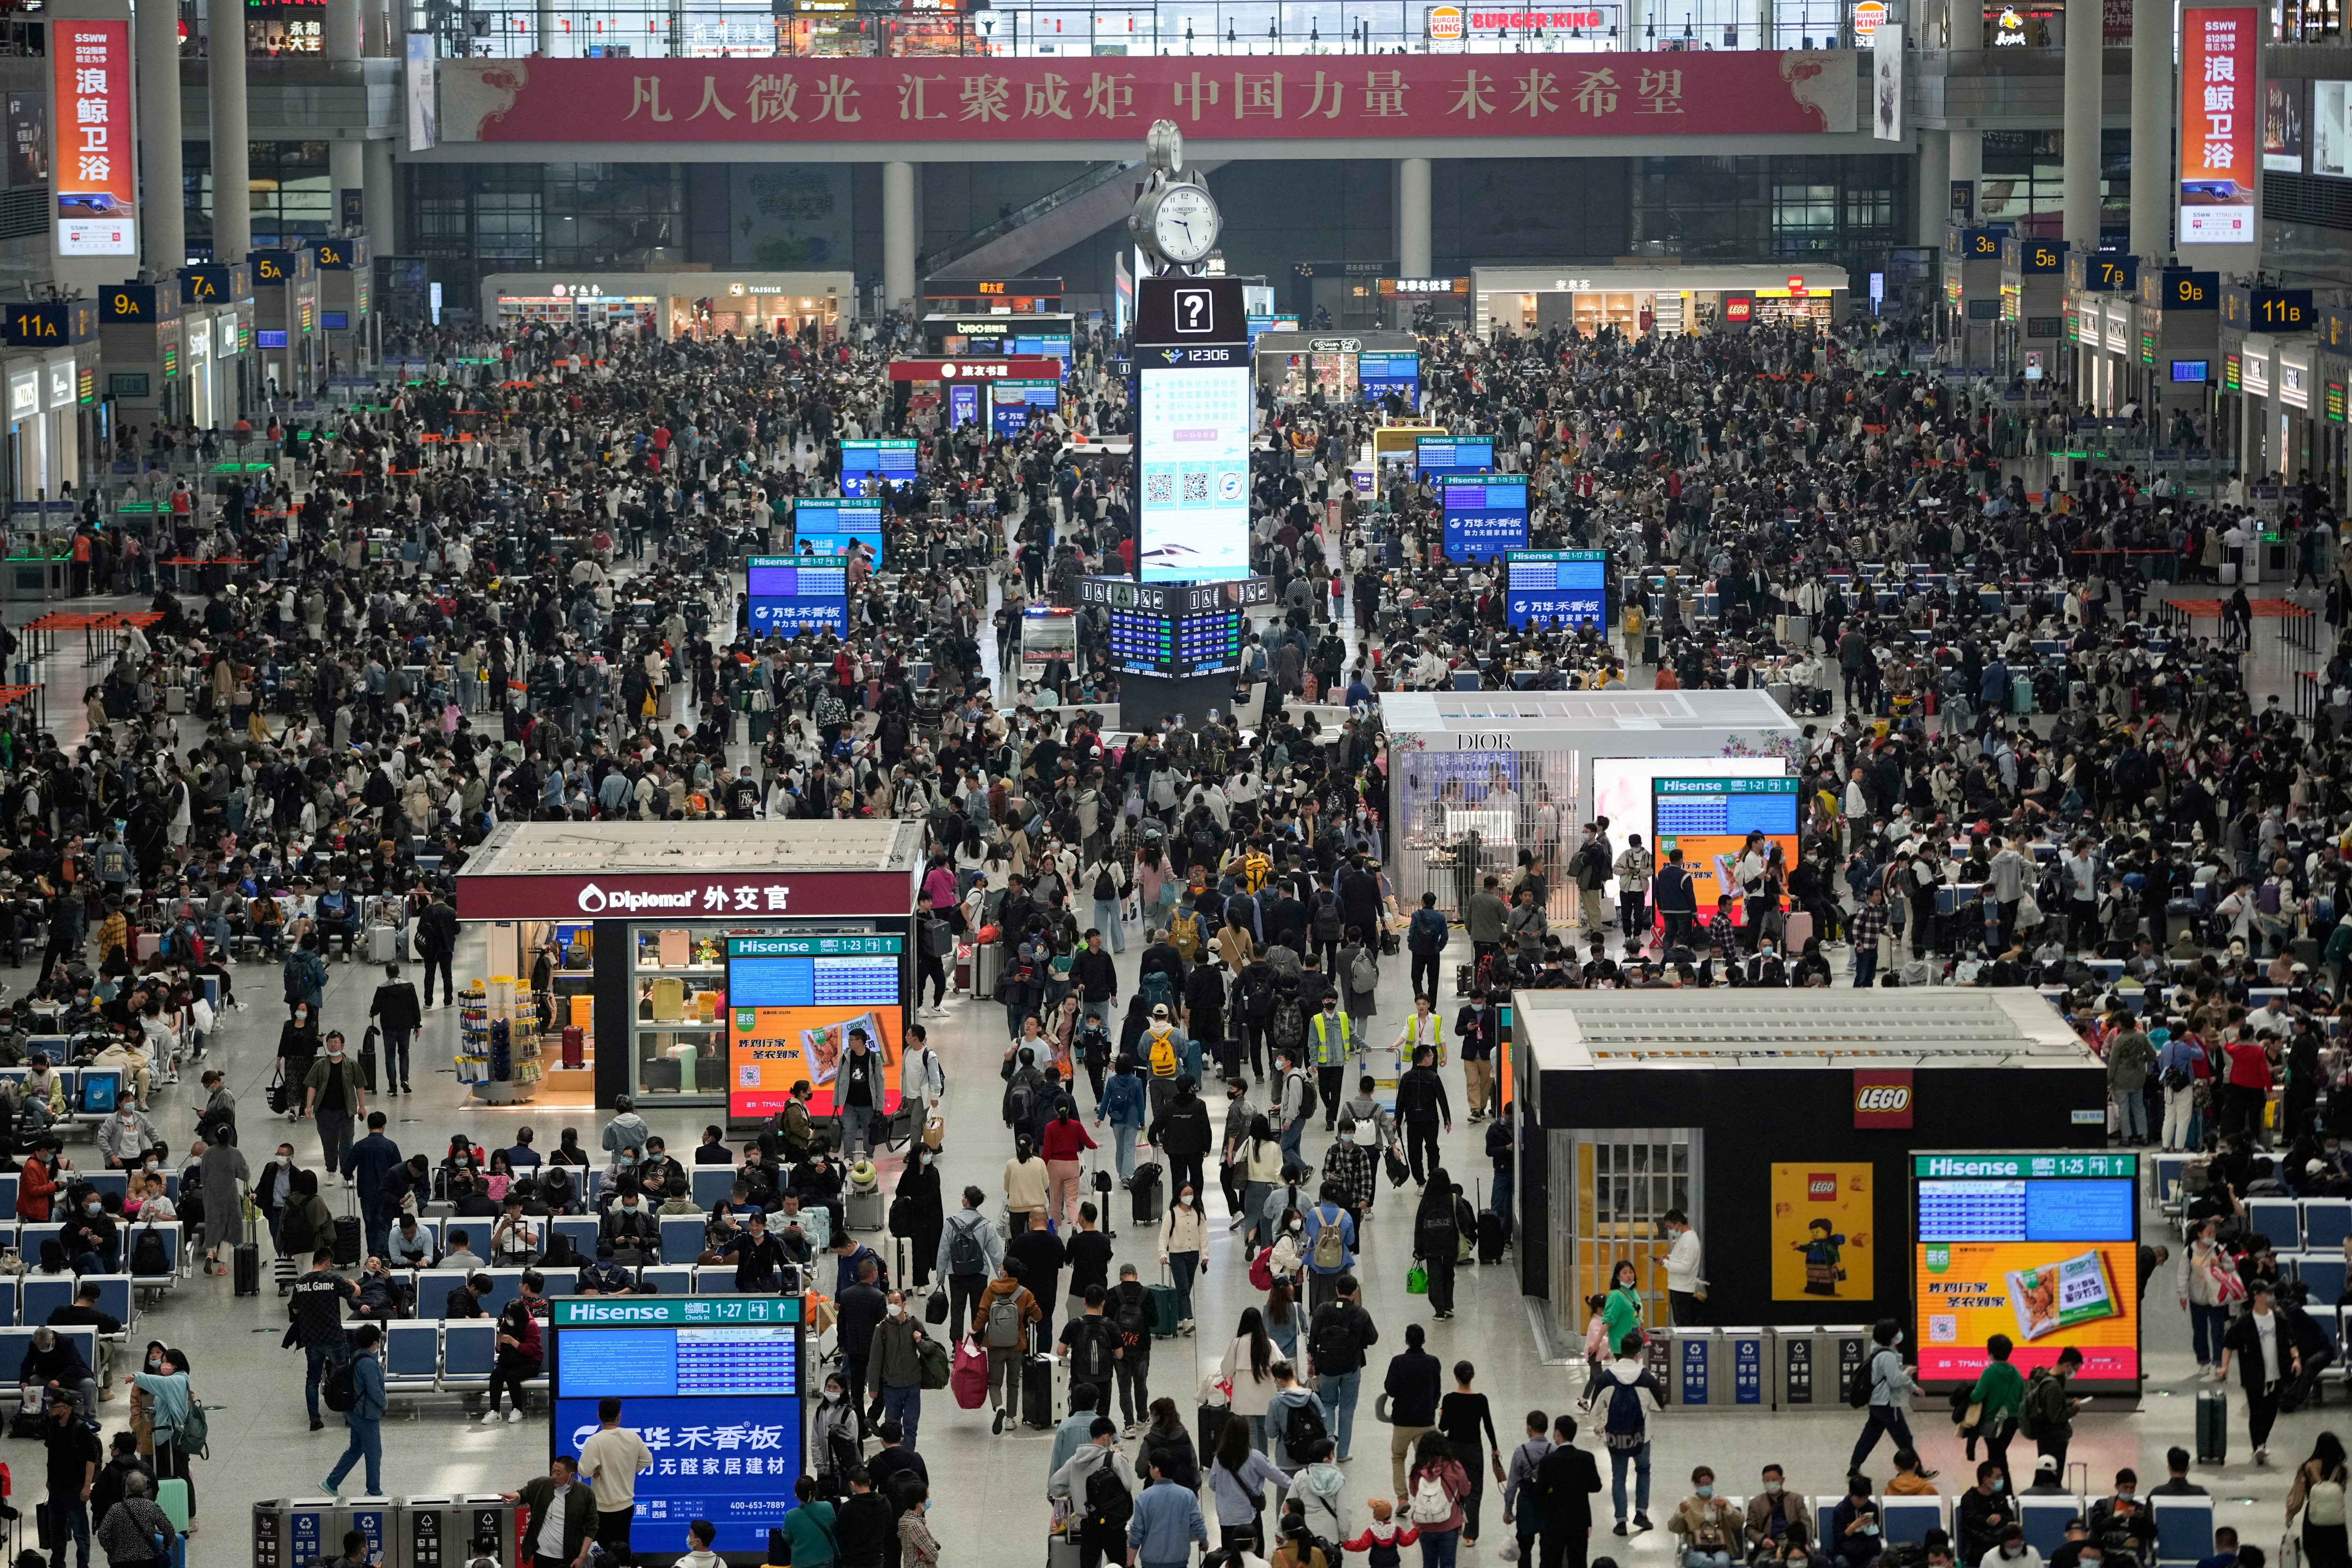 Passengers wait to board at Shanghai Hongqiao Railway Station in Shanghai ahead of the five-day Labor Day holiday.